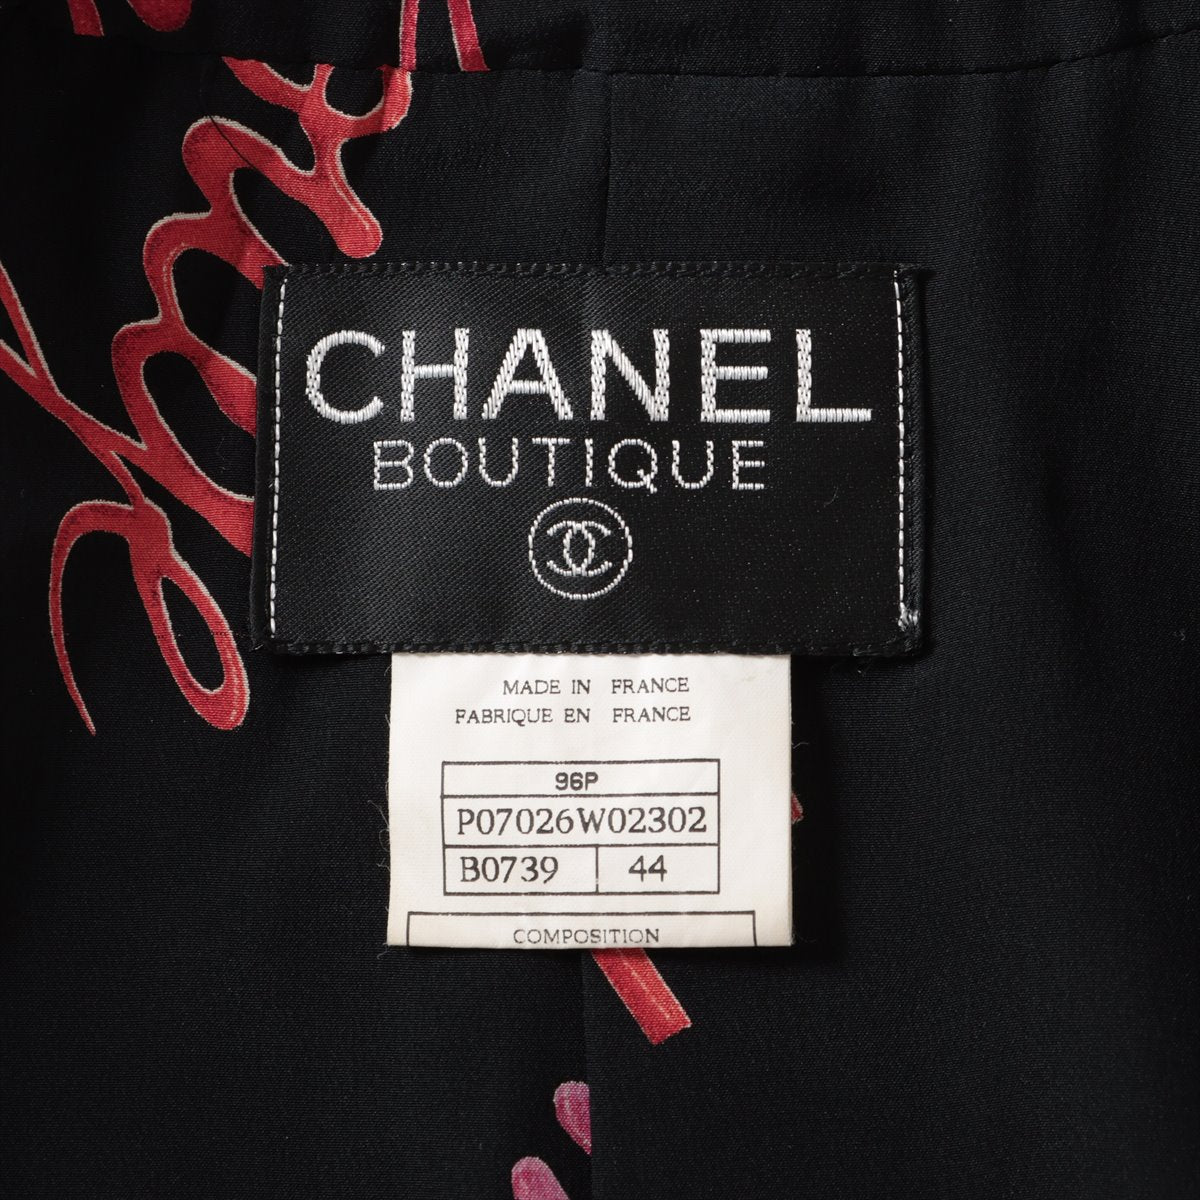 Chanel Coco Button 96P Wool Setup 44 Ladies' Black  P07026W02302 There is a scuff